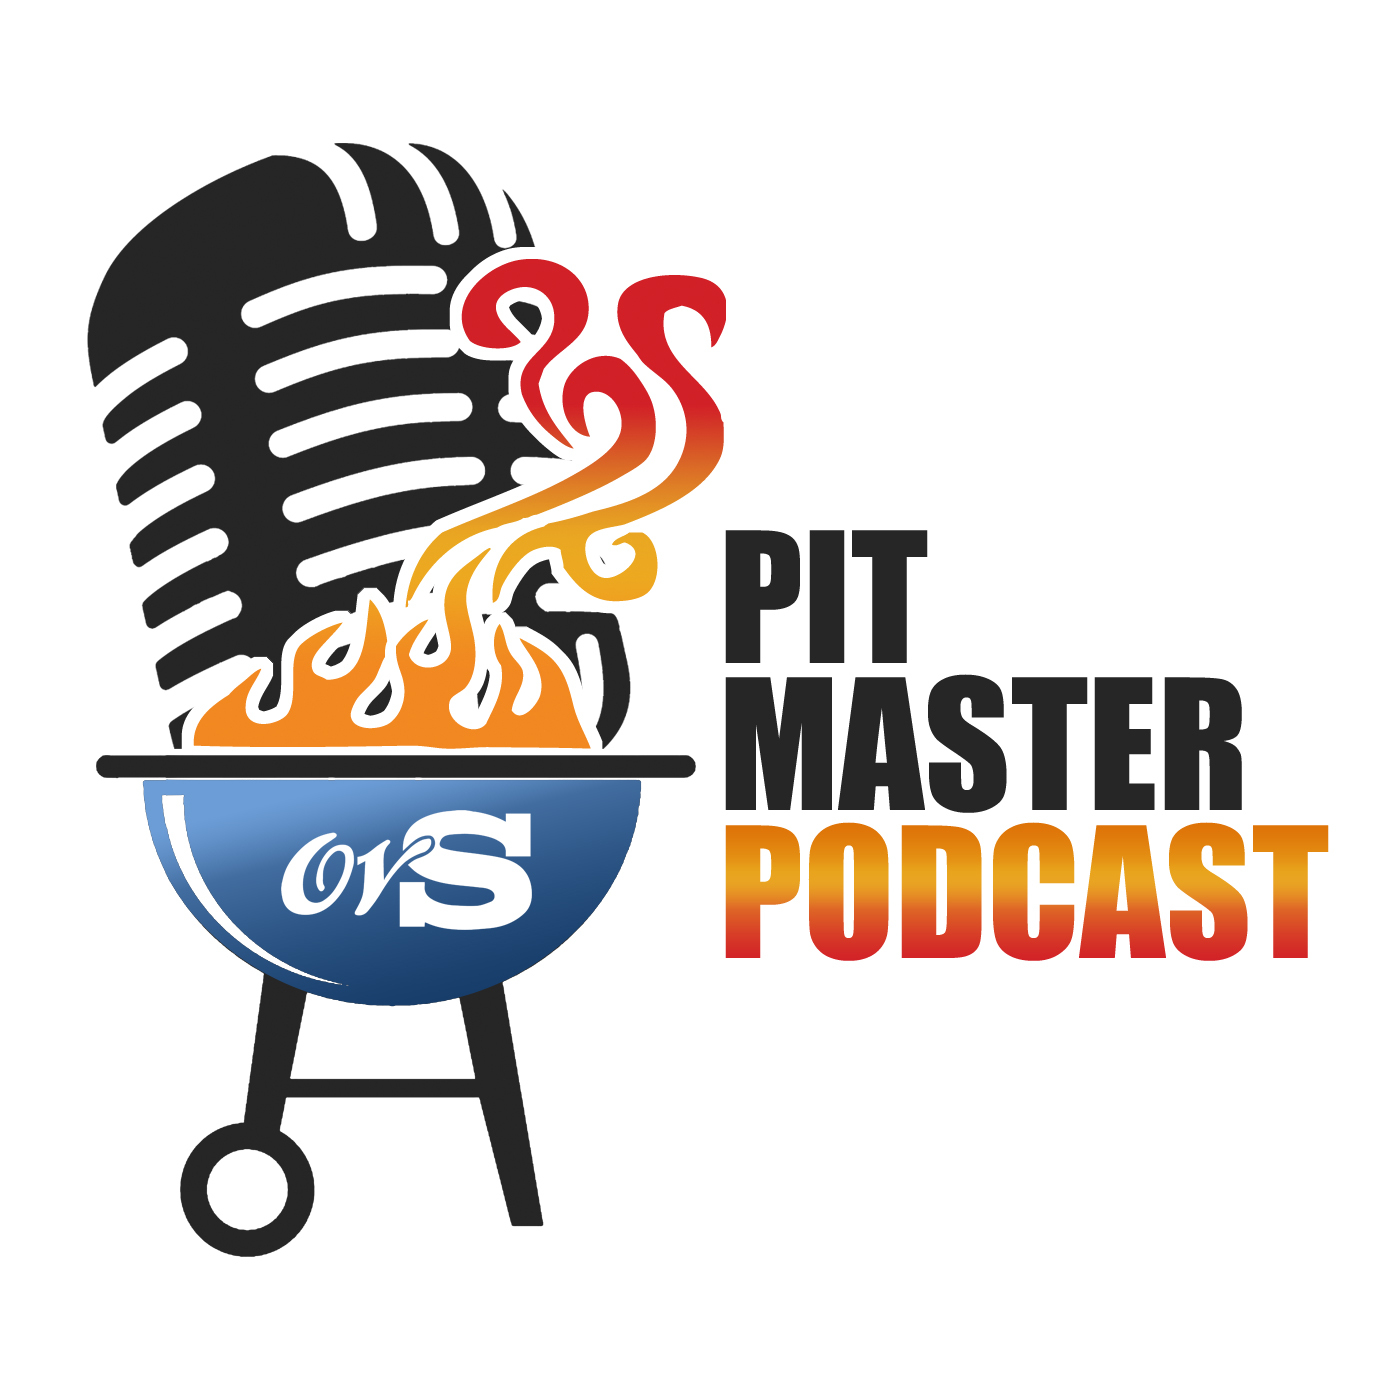 Pitmaster, an Old Virginia Smoke Podcast